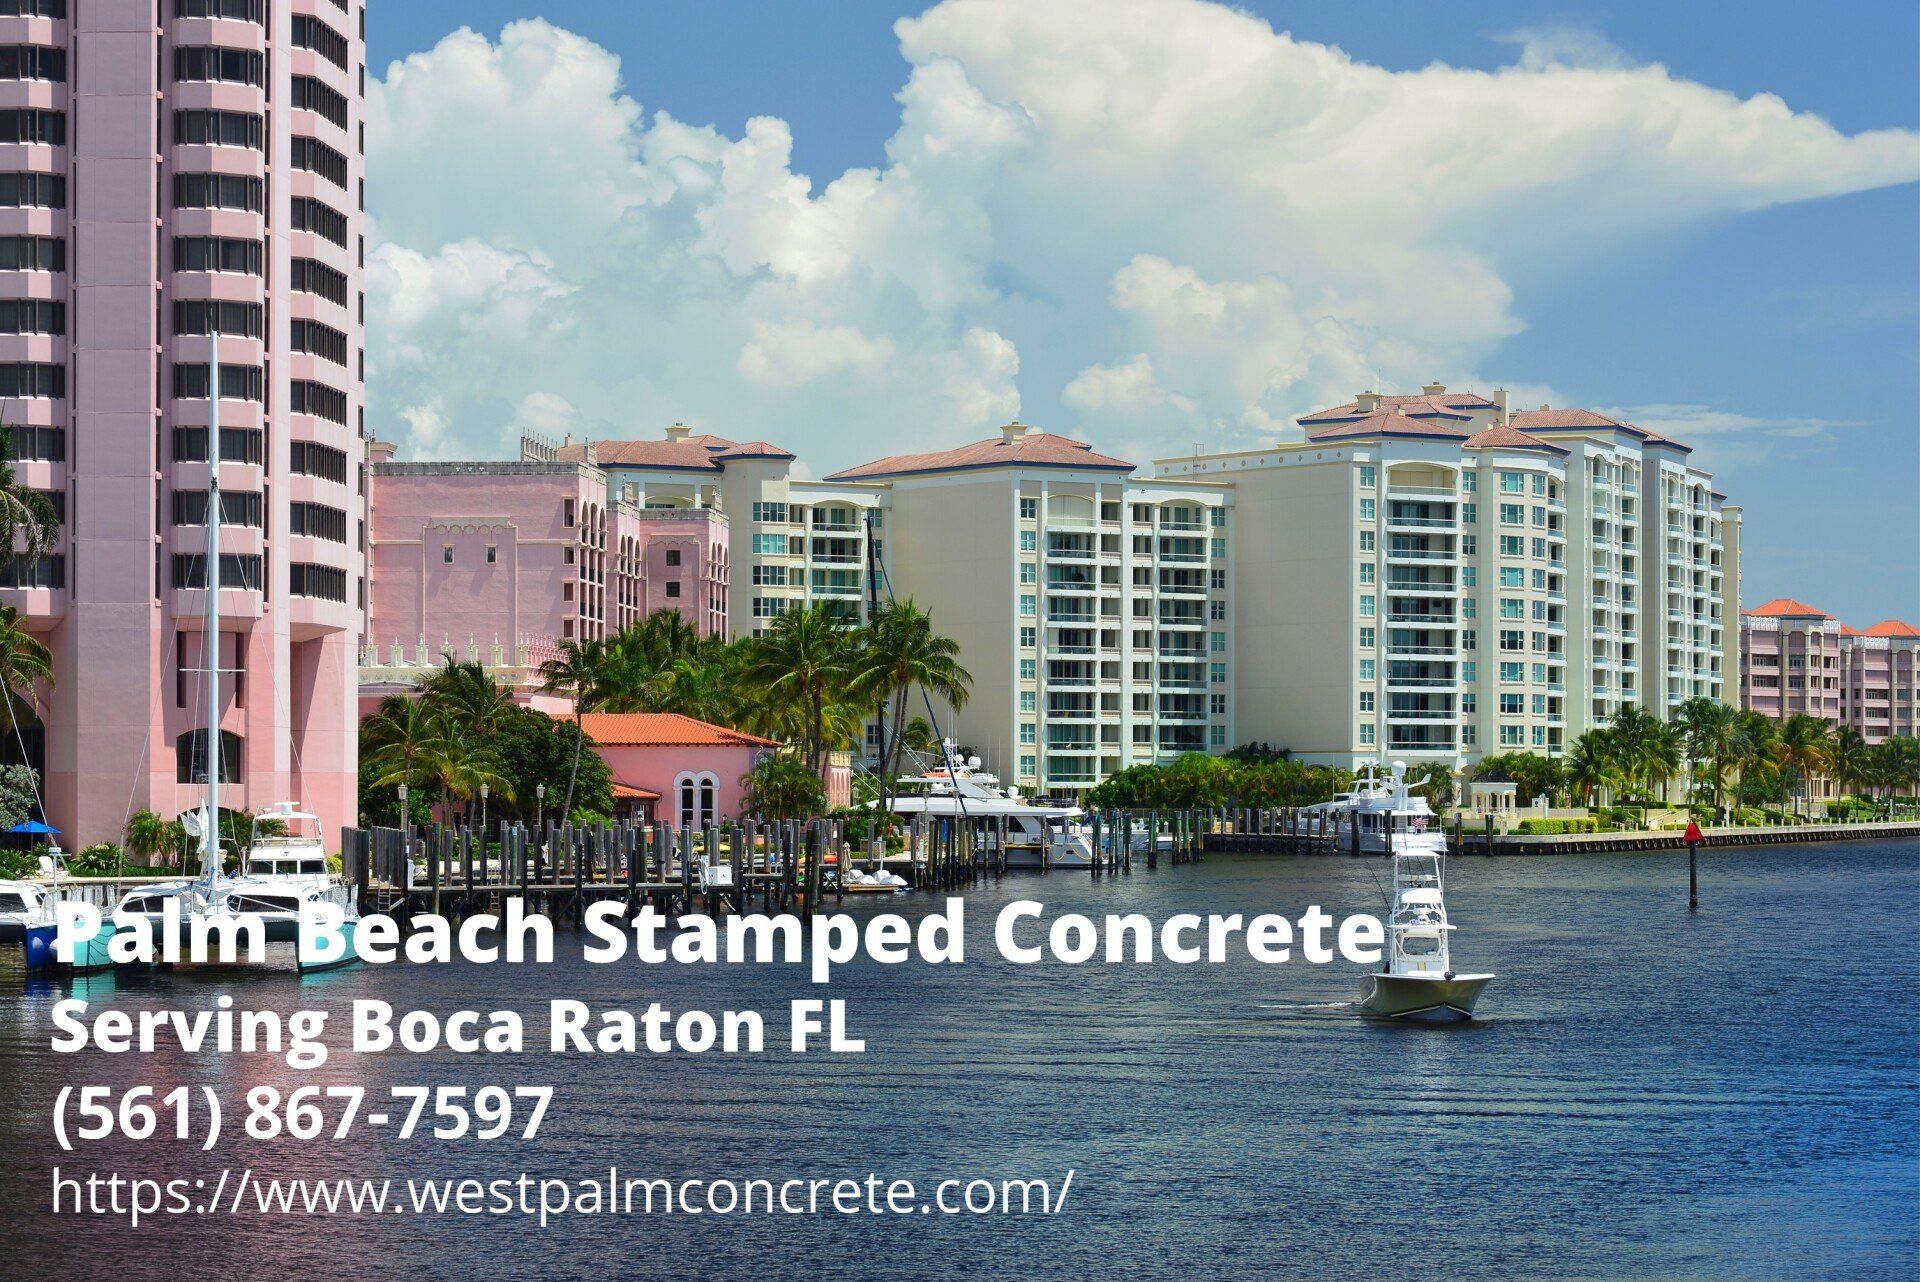 contact details of Palm Beach Stamped Concrete - a decorative concrete contractor serving Boca Raton and the entire Palm Beach County